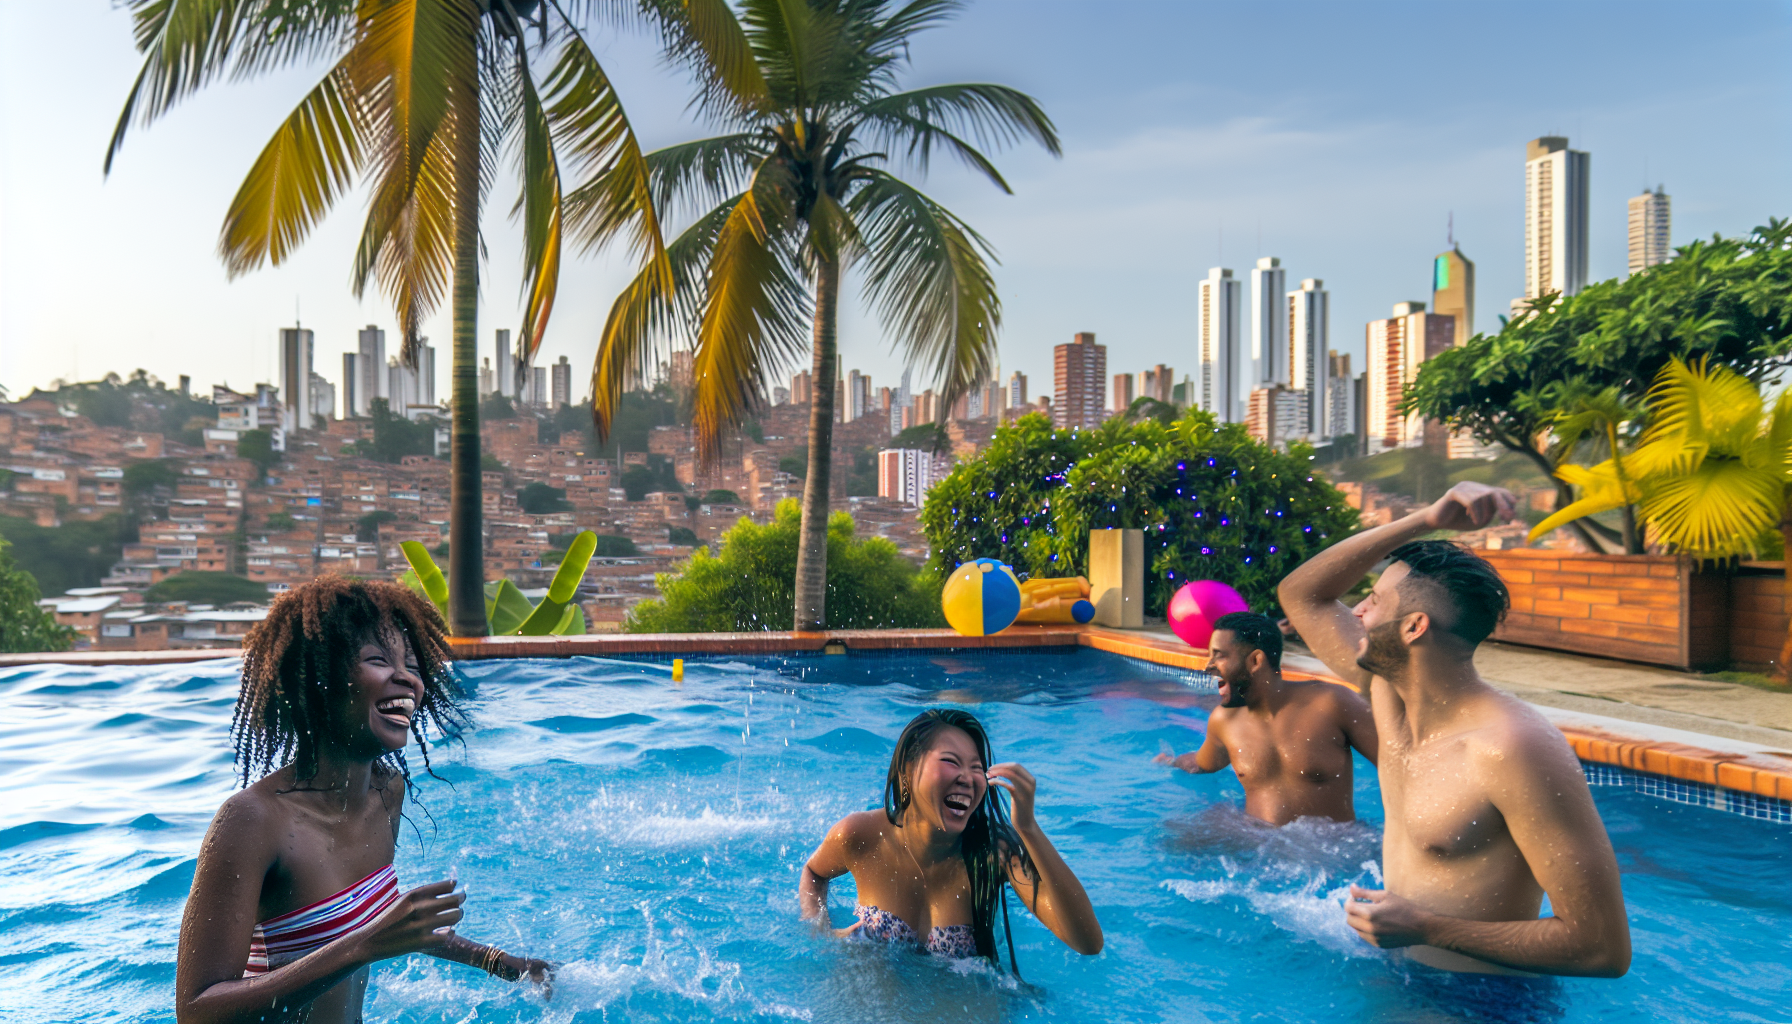 A group of friends celebrating at a pool party in Medellin